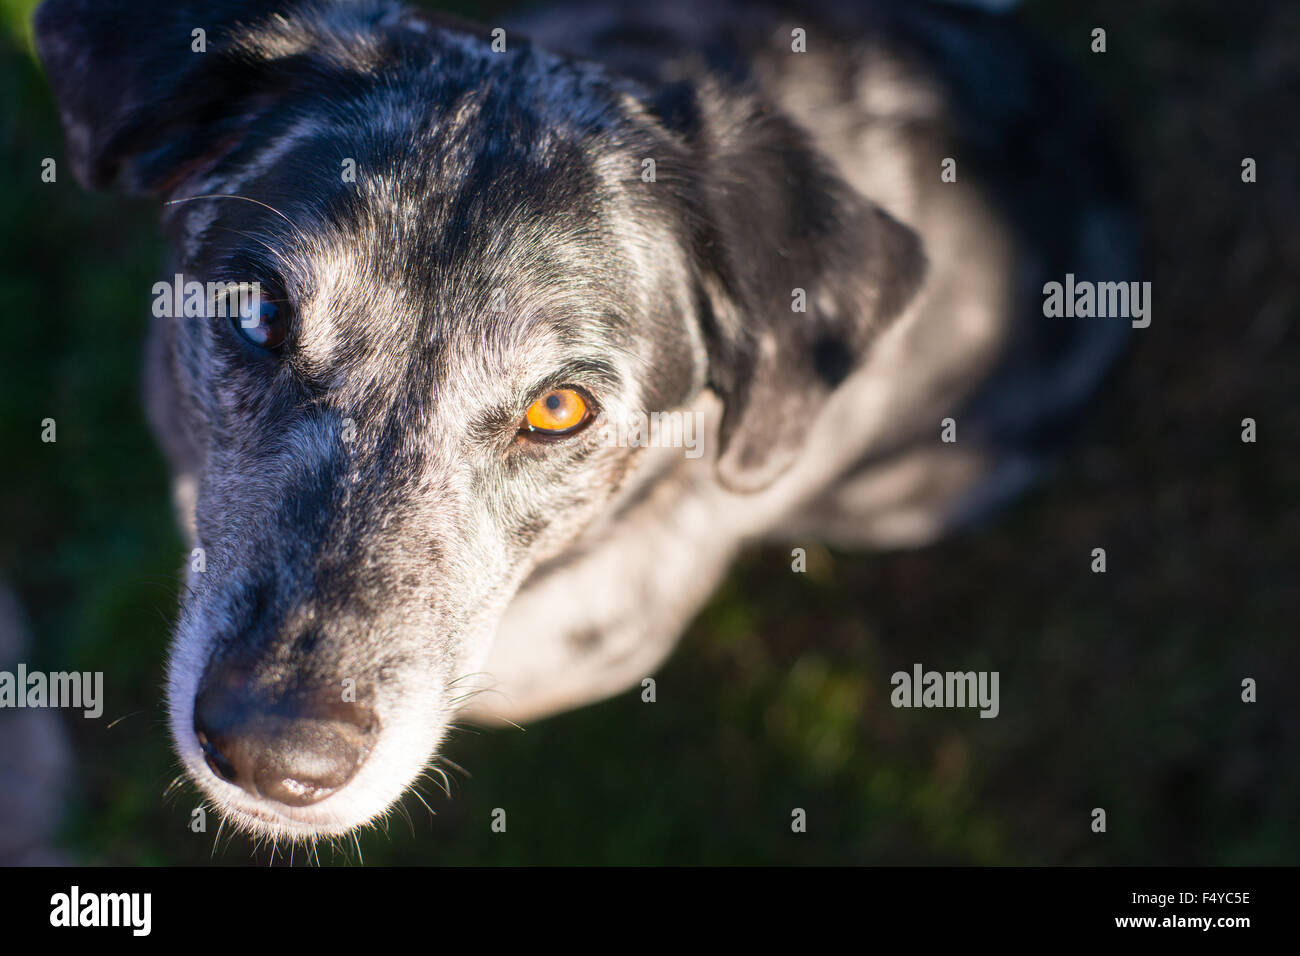 This unique dog looks at you with wonderful anticipation Stock Photo